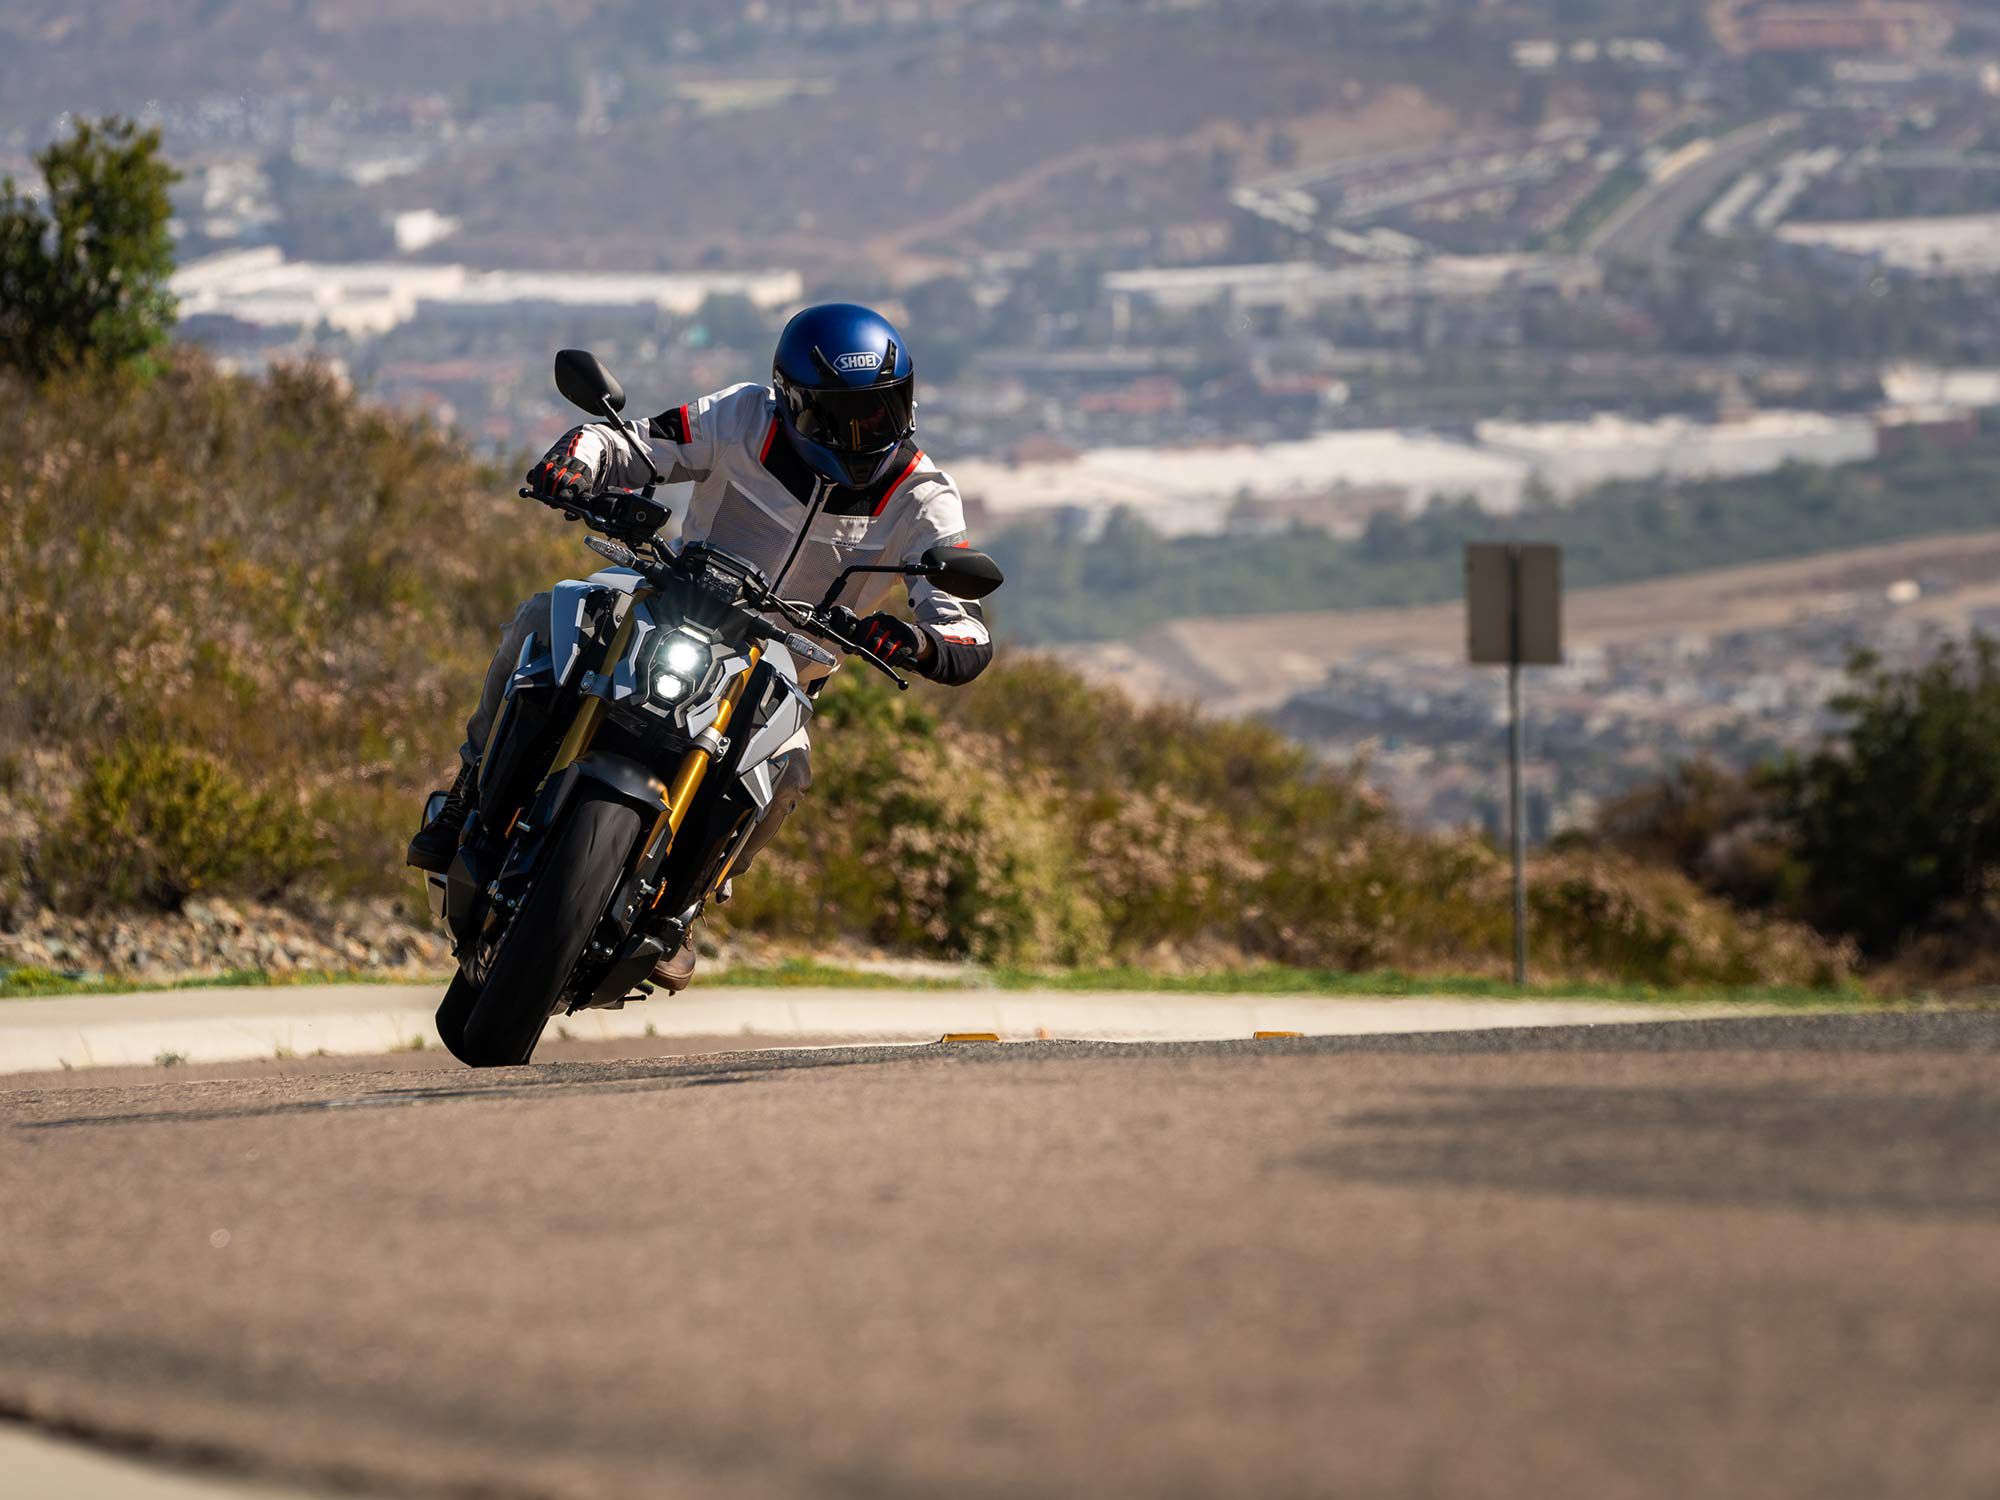 In spite of its hefty 472-pound curb weight, the GSX-S1000 is an exceptionally agile streetbike.